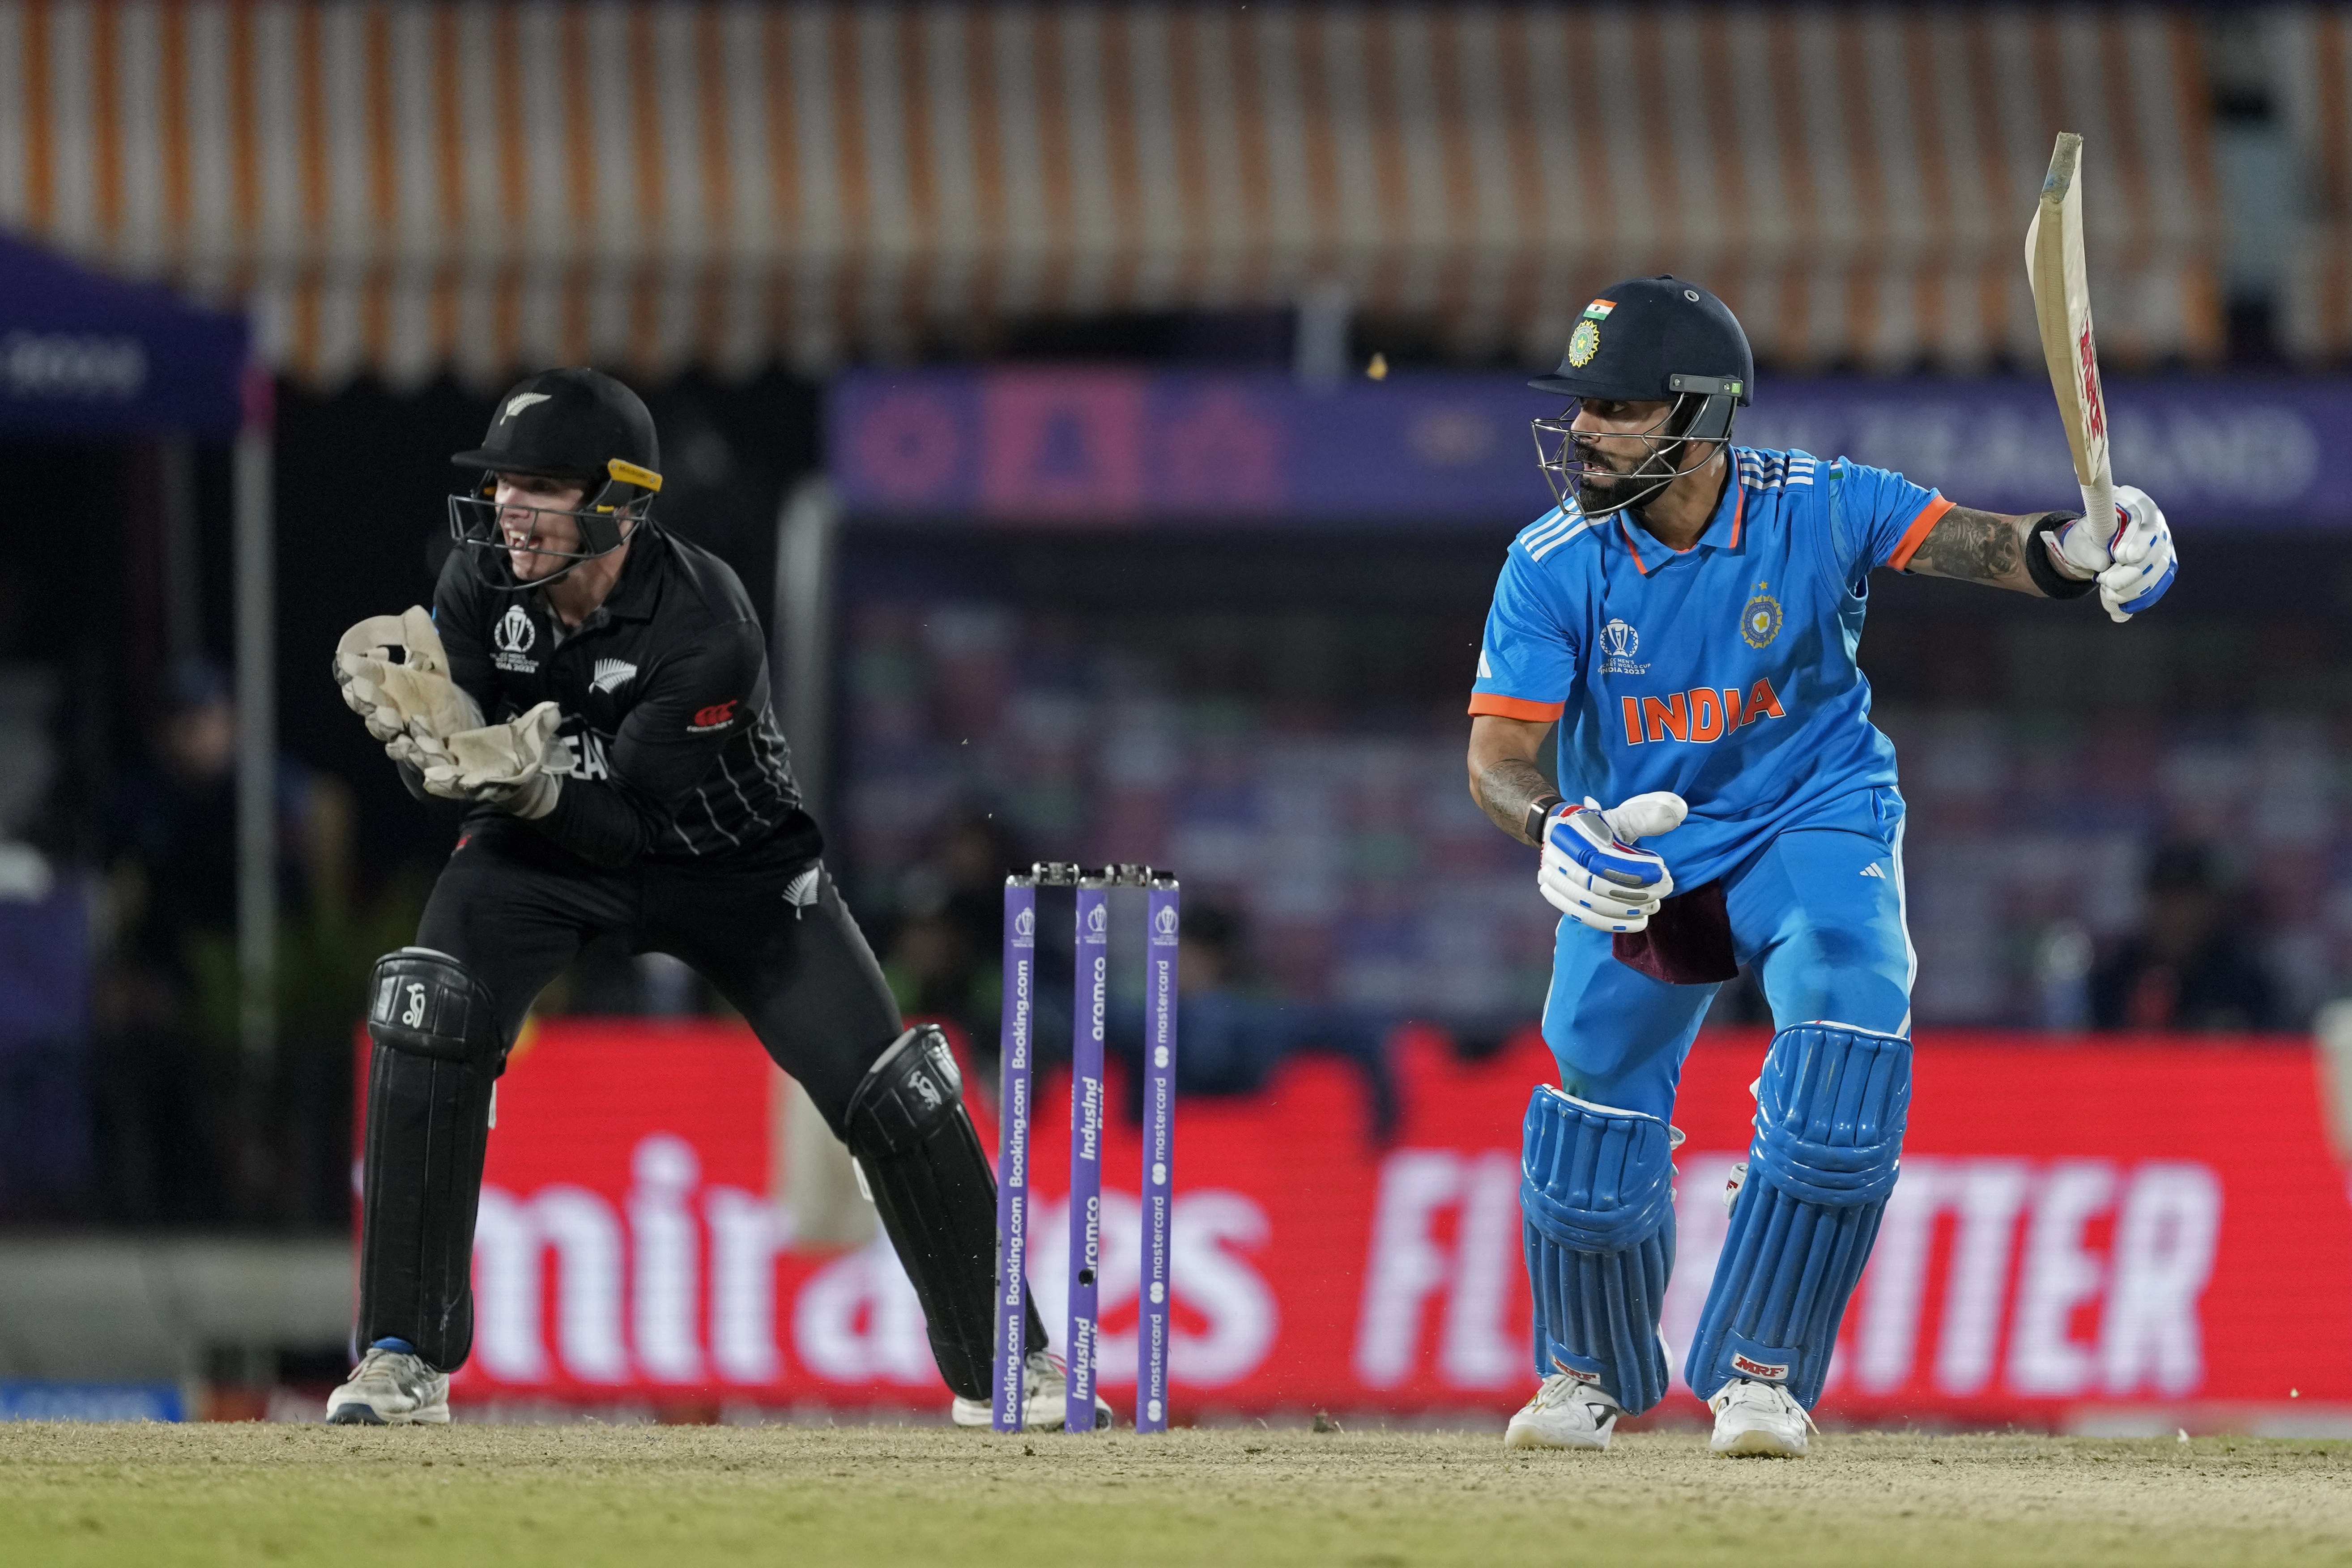 India stays unbeaten as Kohli shines in victory over New Zealand at Cricket World Cup | ICC Cricket World Cup replace